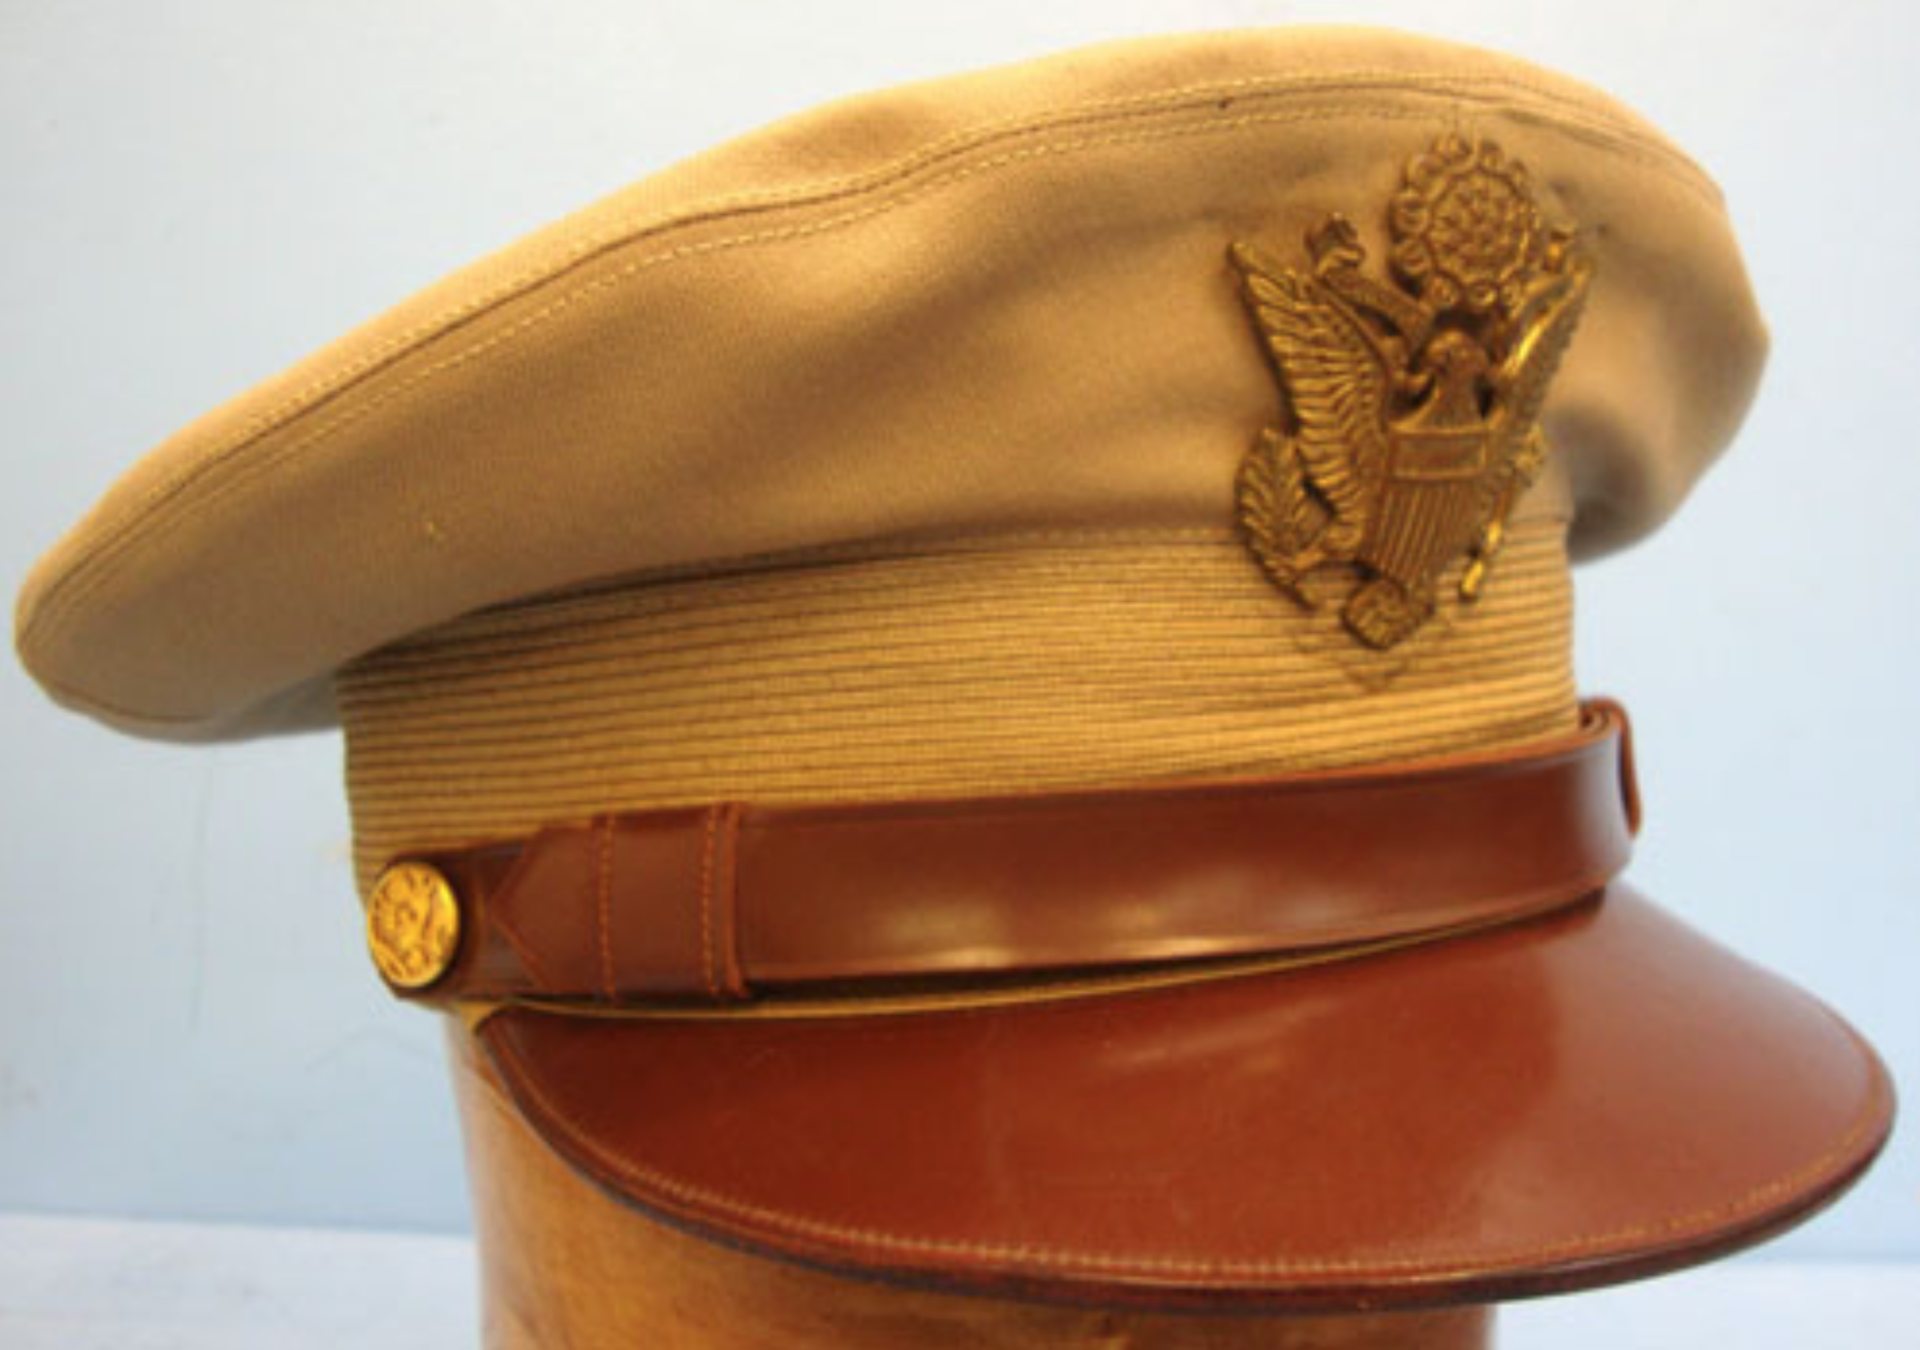 WW2 1943 USAAF Officer's Tropical Peaked Cap, Size 7 1/4".